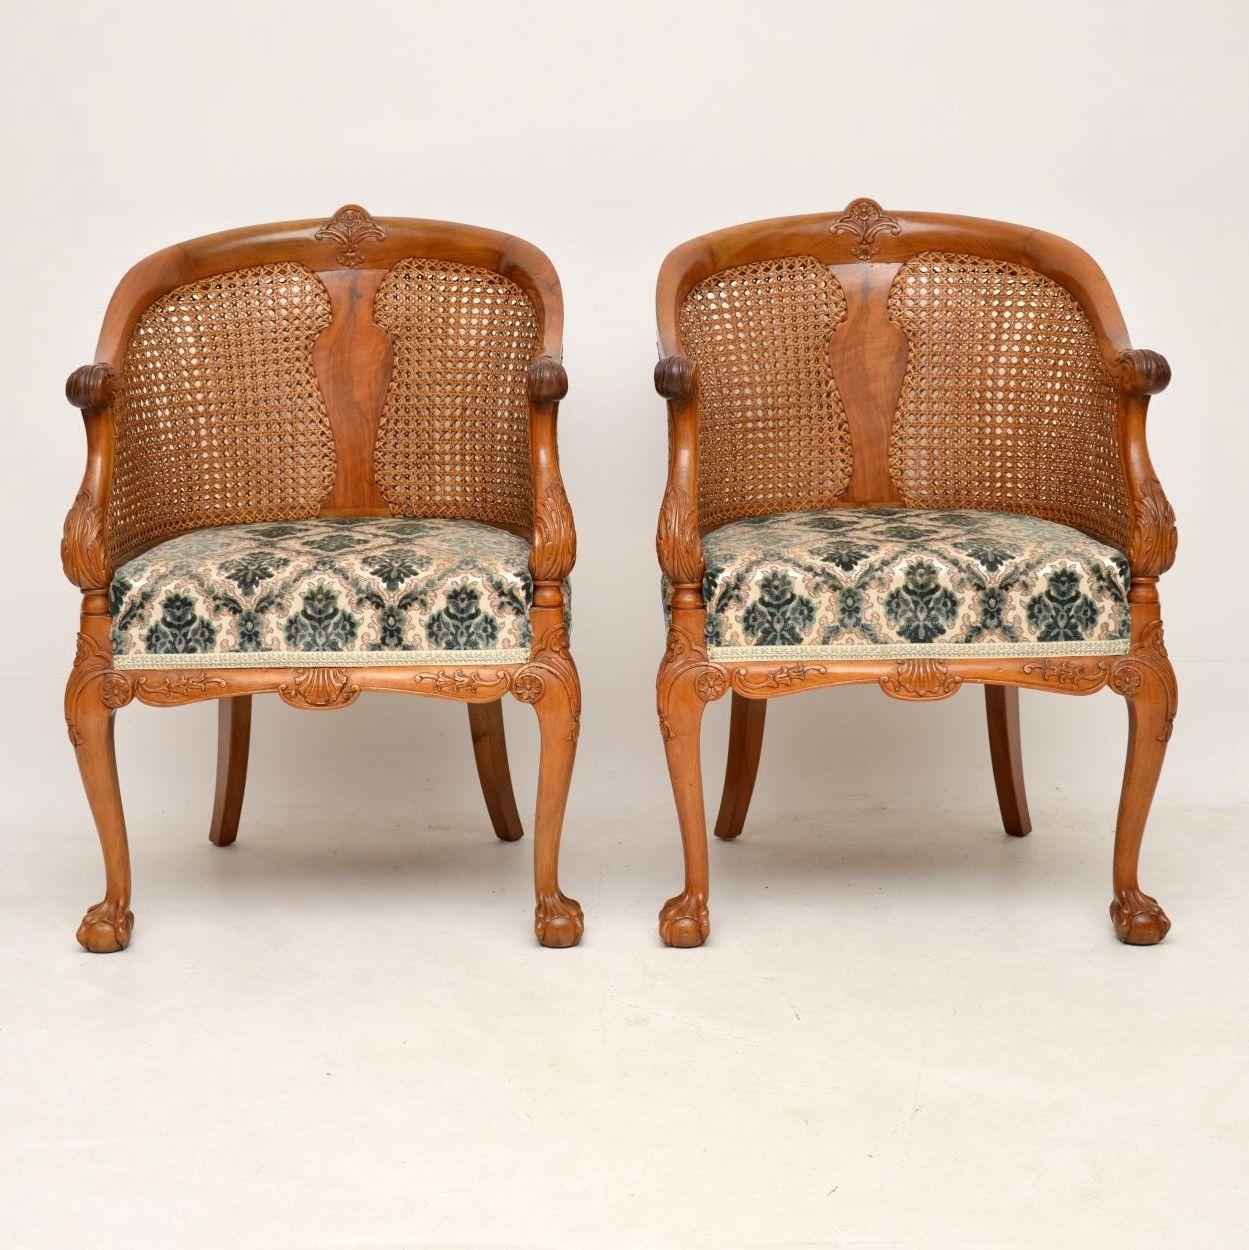 This pair of antique solid walnut bergere armchairs are great quality and superbly carved all over. Please enlarge all the images to see all the fine details. They are double caned either sides of the central splats and the cane is all original and